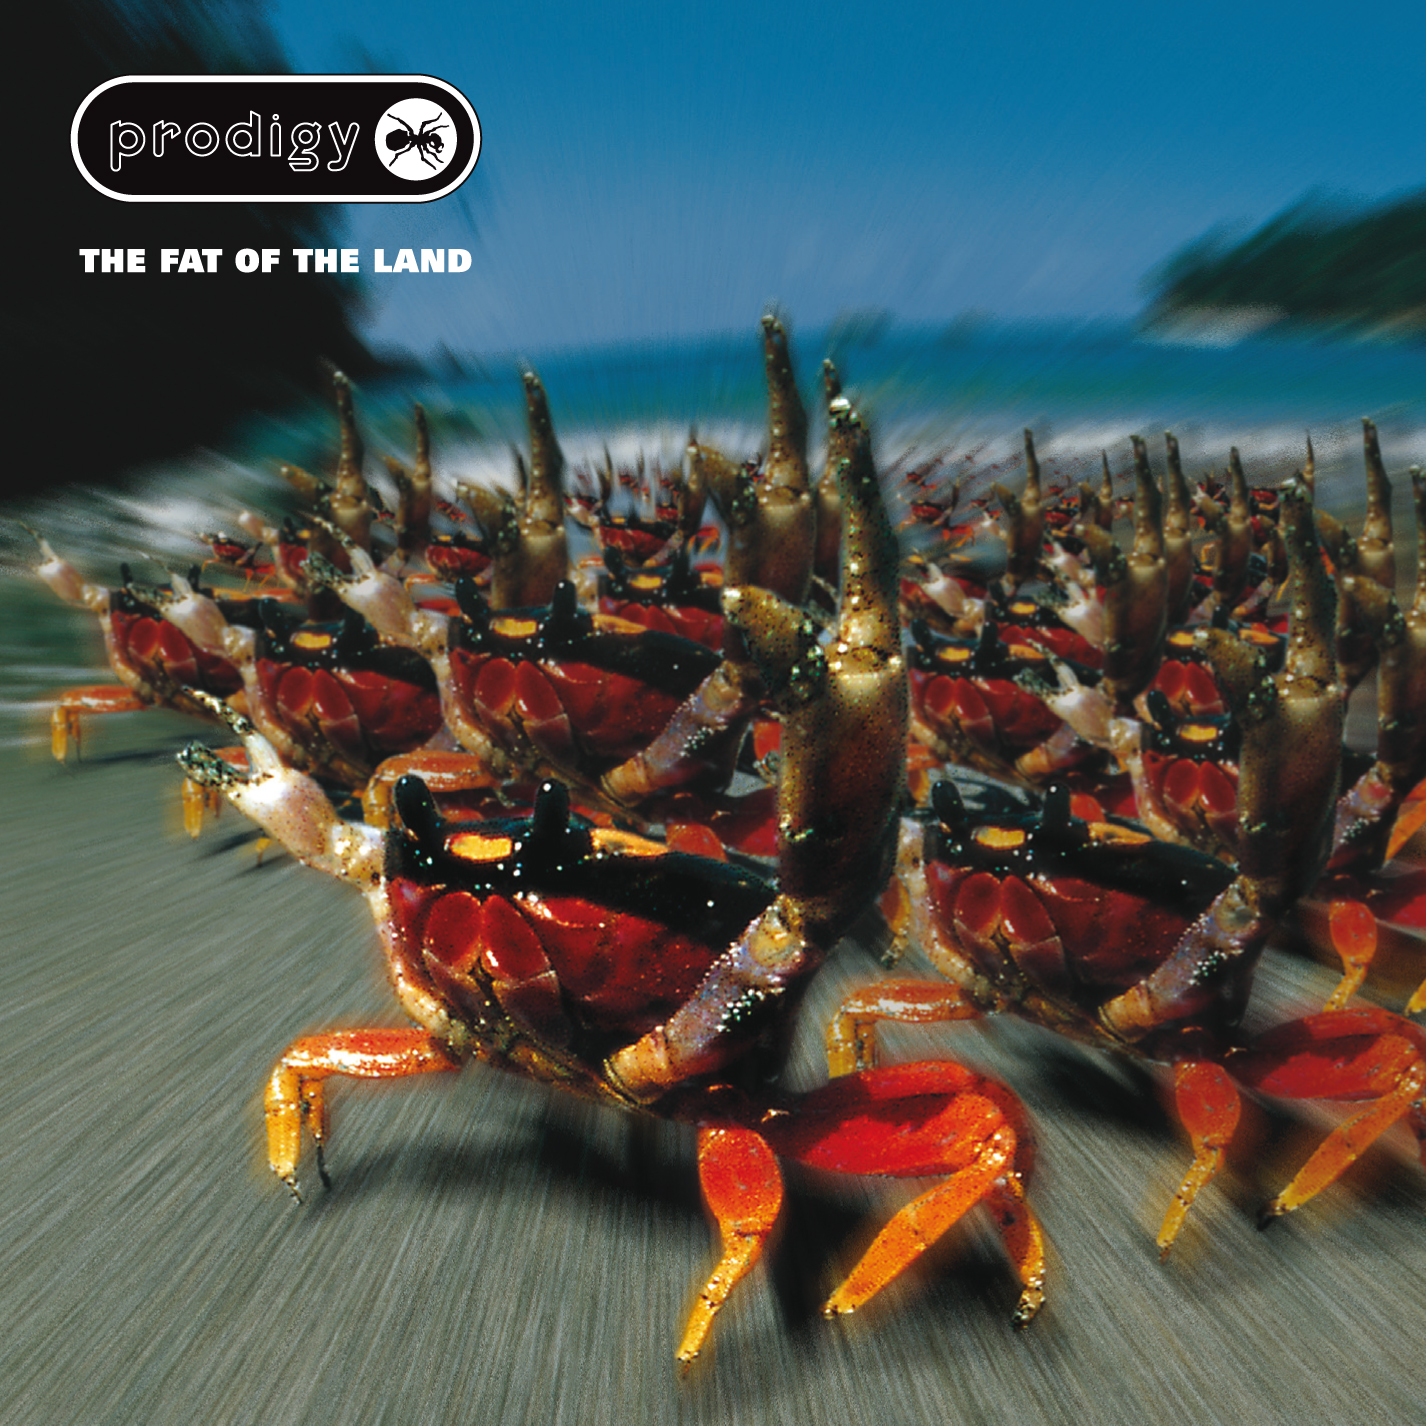 The Prodigy - The Fat of the Land (Expanded) - 2xCD